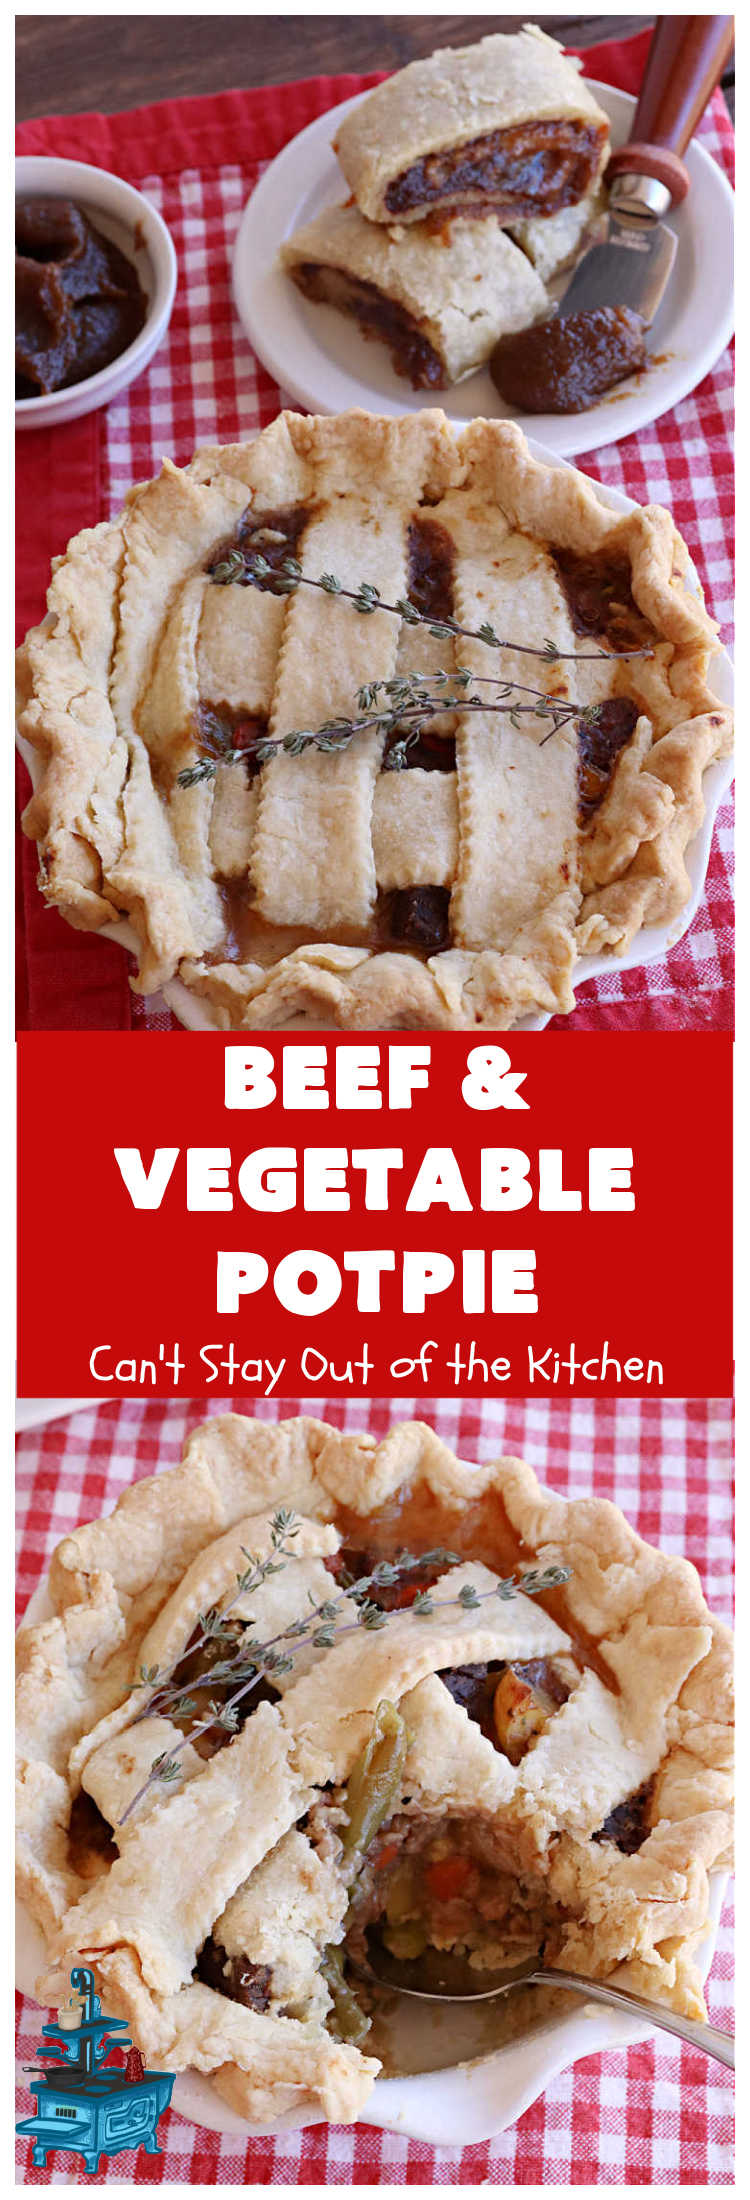 Beef & Vegetable Potpie | Can't Stay Out of the Kitchen | scrumptious #Potpie #recipe with #StewBeef seasoned with #MontrealSteakSeasoning, #potatoes, #carrots, #peas, 
 #GreenBeans & corn in a delicious, flaky #HomemadePieCrust. Every bite is mouthwatering, irresistible comfort food! #beef #BeefAndVegetablePotPie